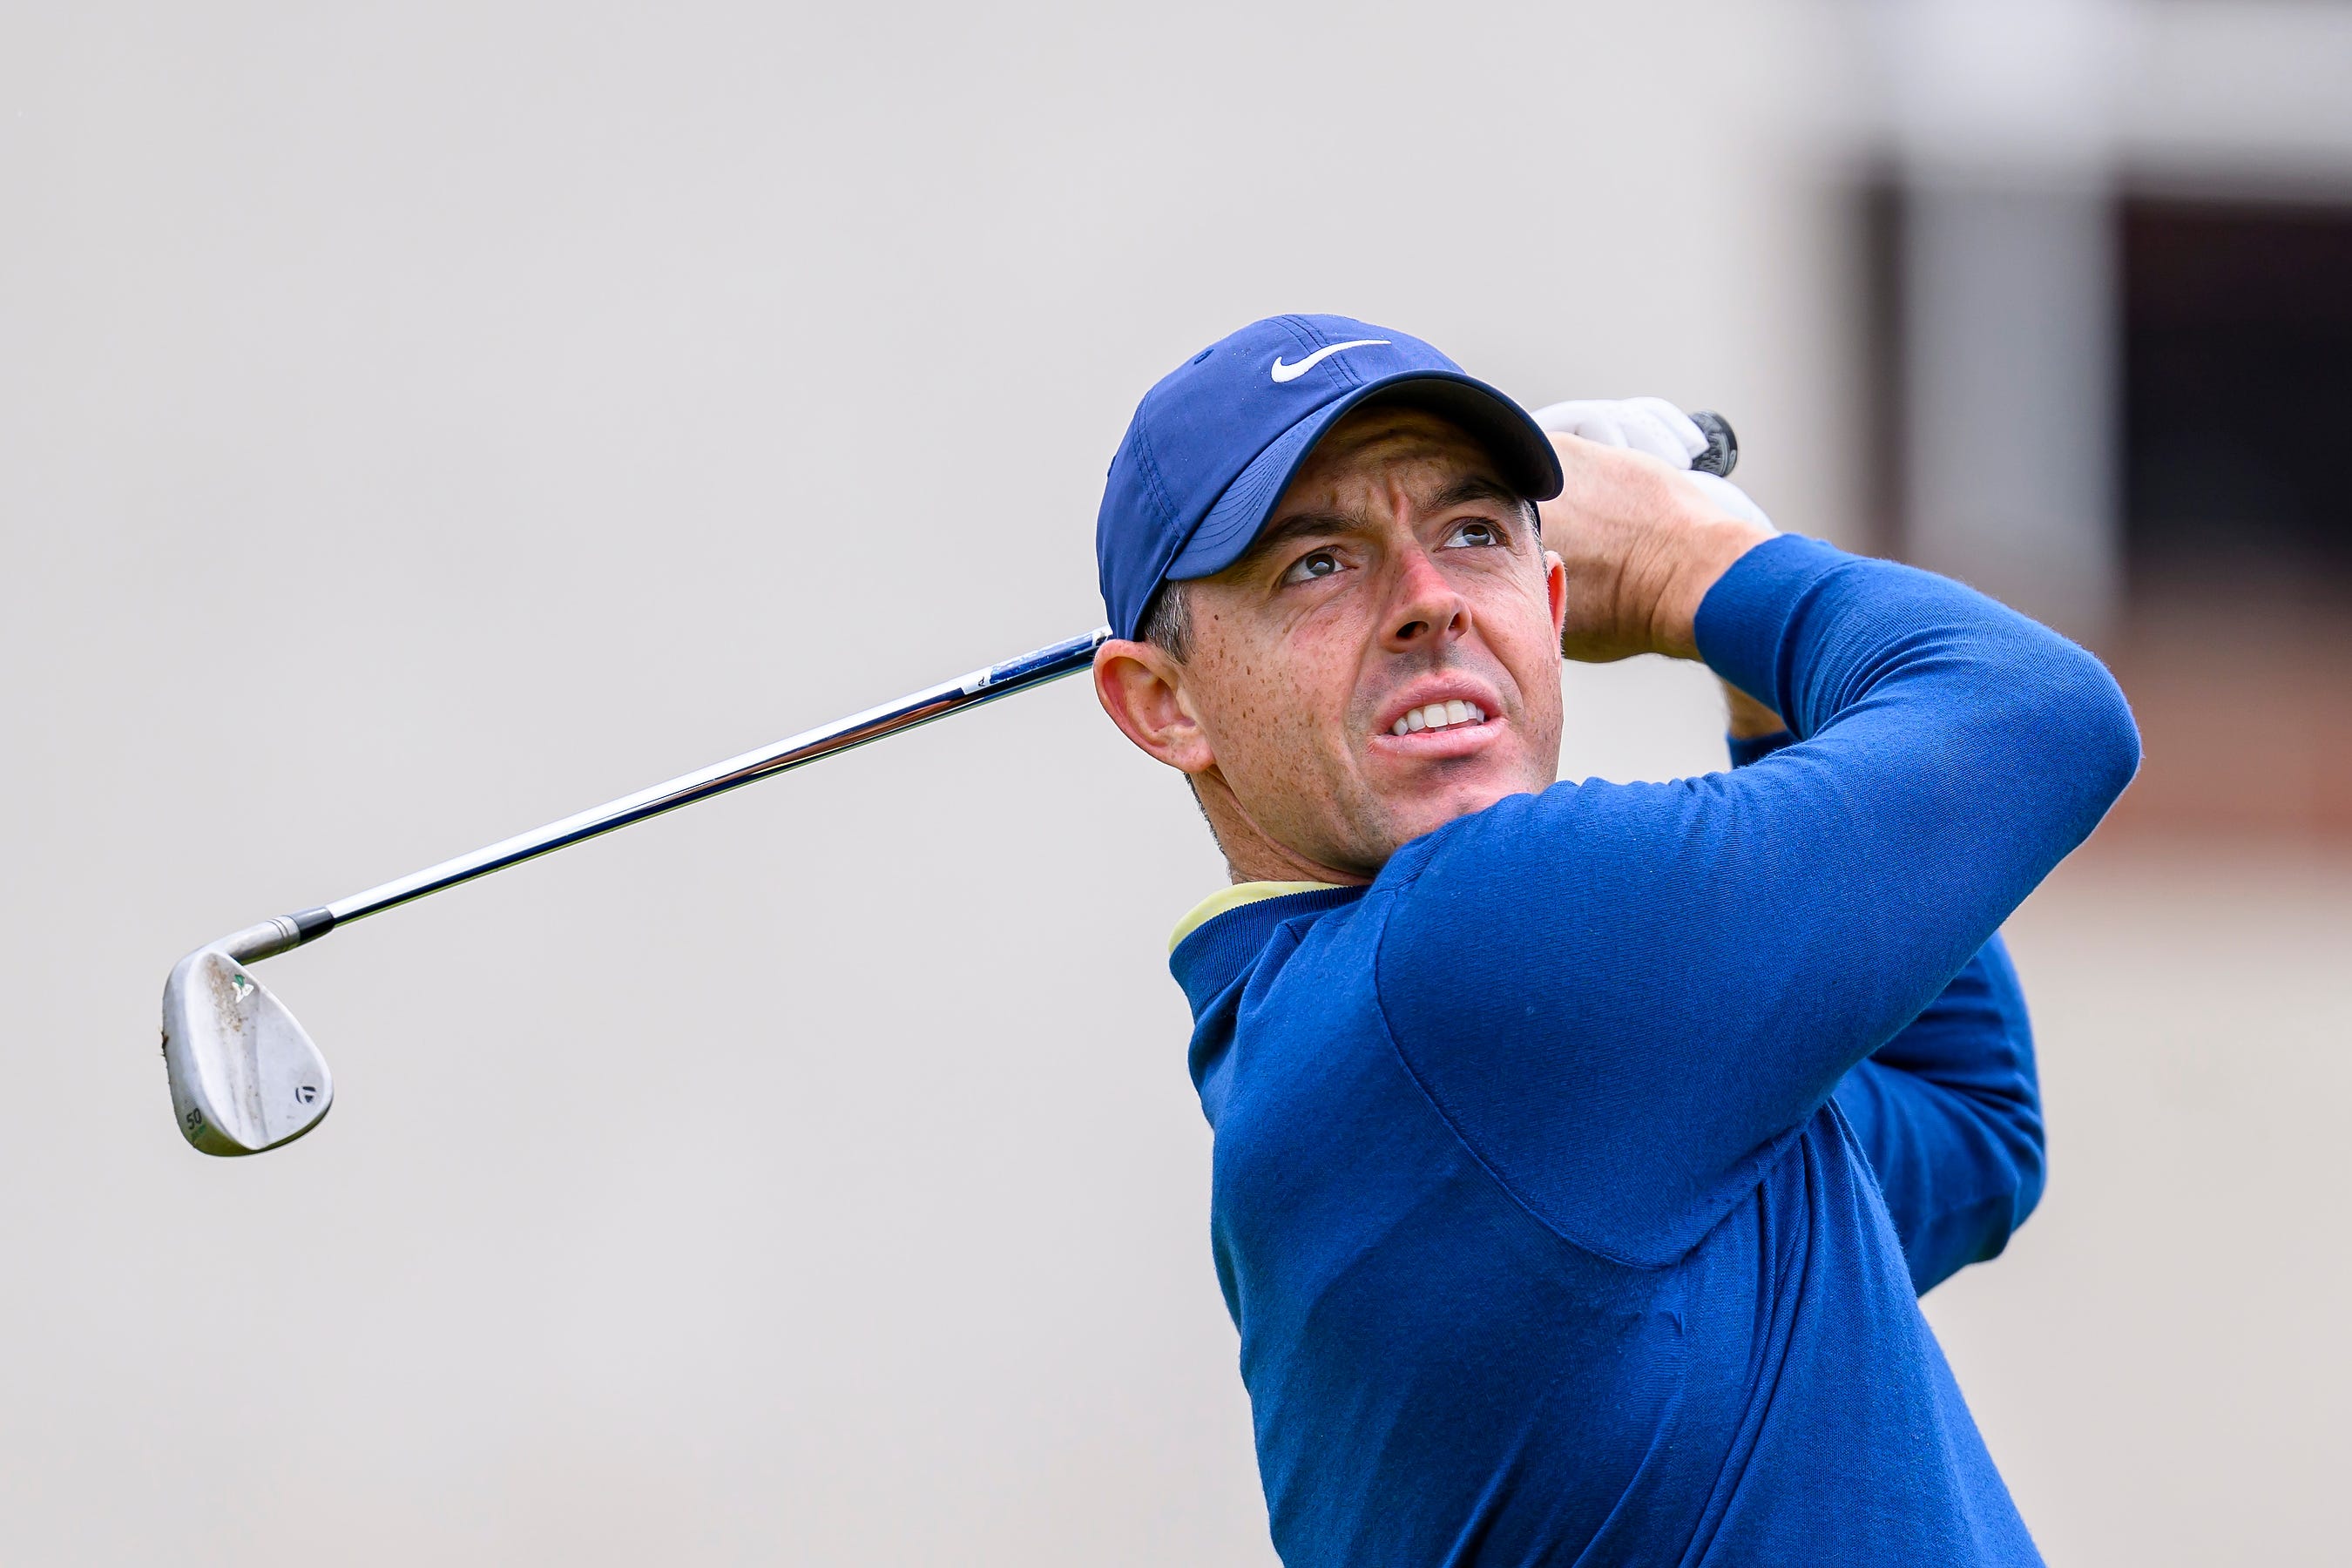 Rory McIlroy has dismissed a suggestion he could be a playing captain in the 2027 Ryder Cup